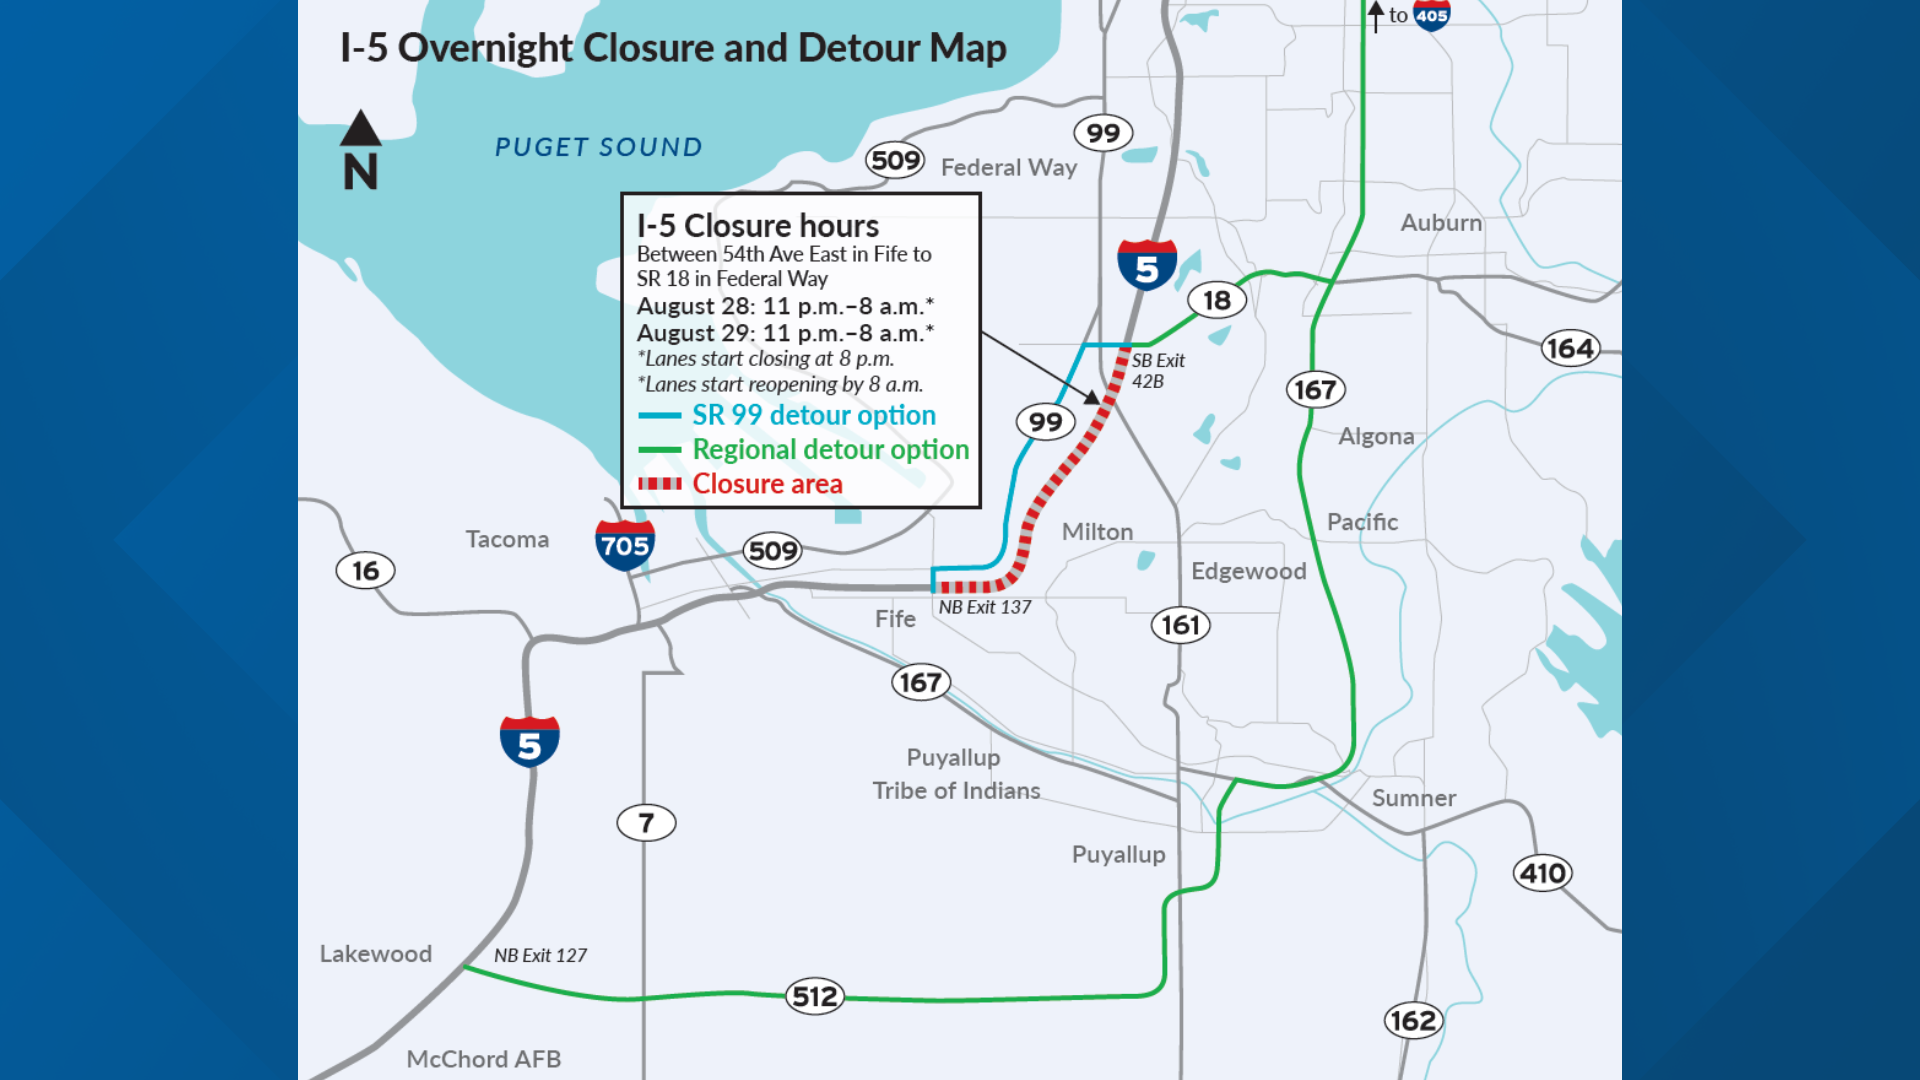 Interstate 5 will be closed from 54th Avenue East in Fife and SR 18 in Federal Way from 11 p.m. to 8 a.m. on Friday and Saturday nights.